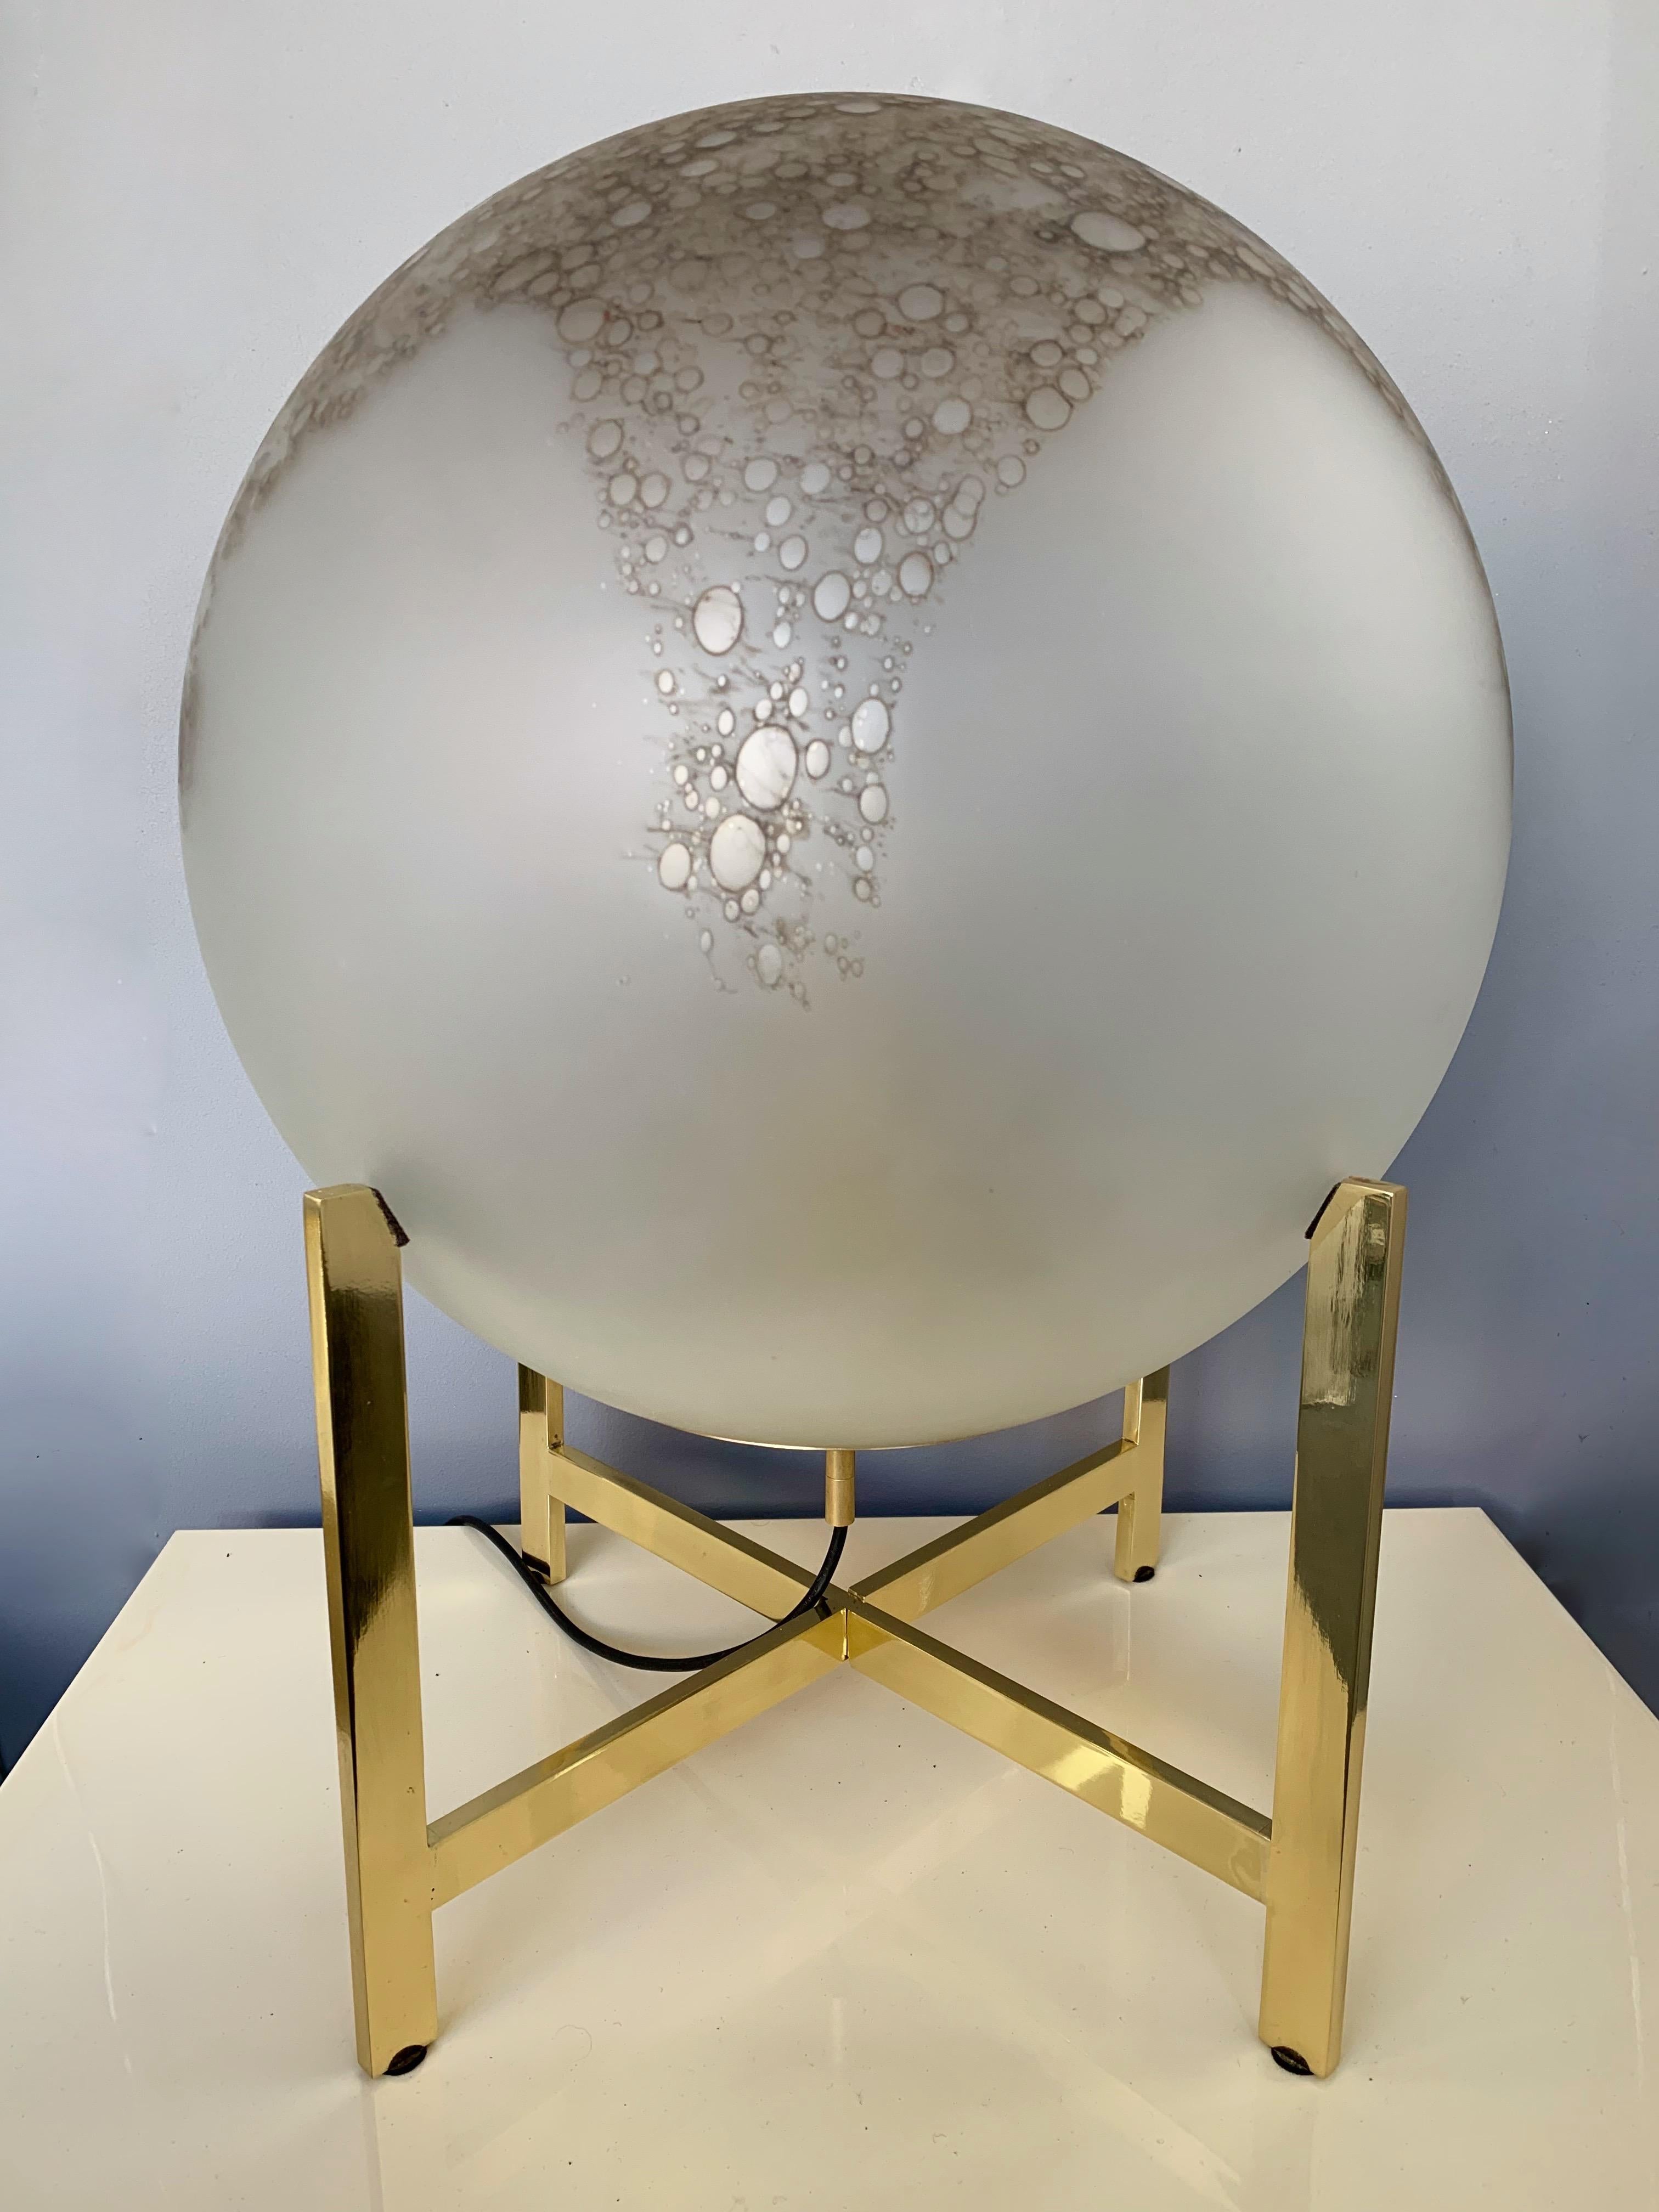 Impressive and very decorative floor or table lamps by La Murrina Murano. Sandblasted frosted blown glass sphere with iron oxid, which gives it this bronze color, the aspect seems like alabaster stone. Simple and elegant polish brass structure.